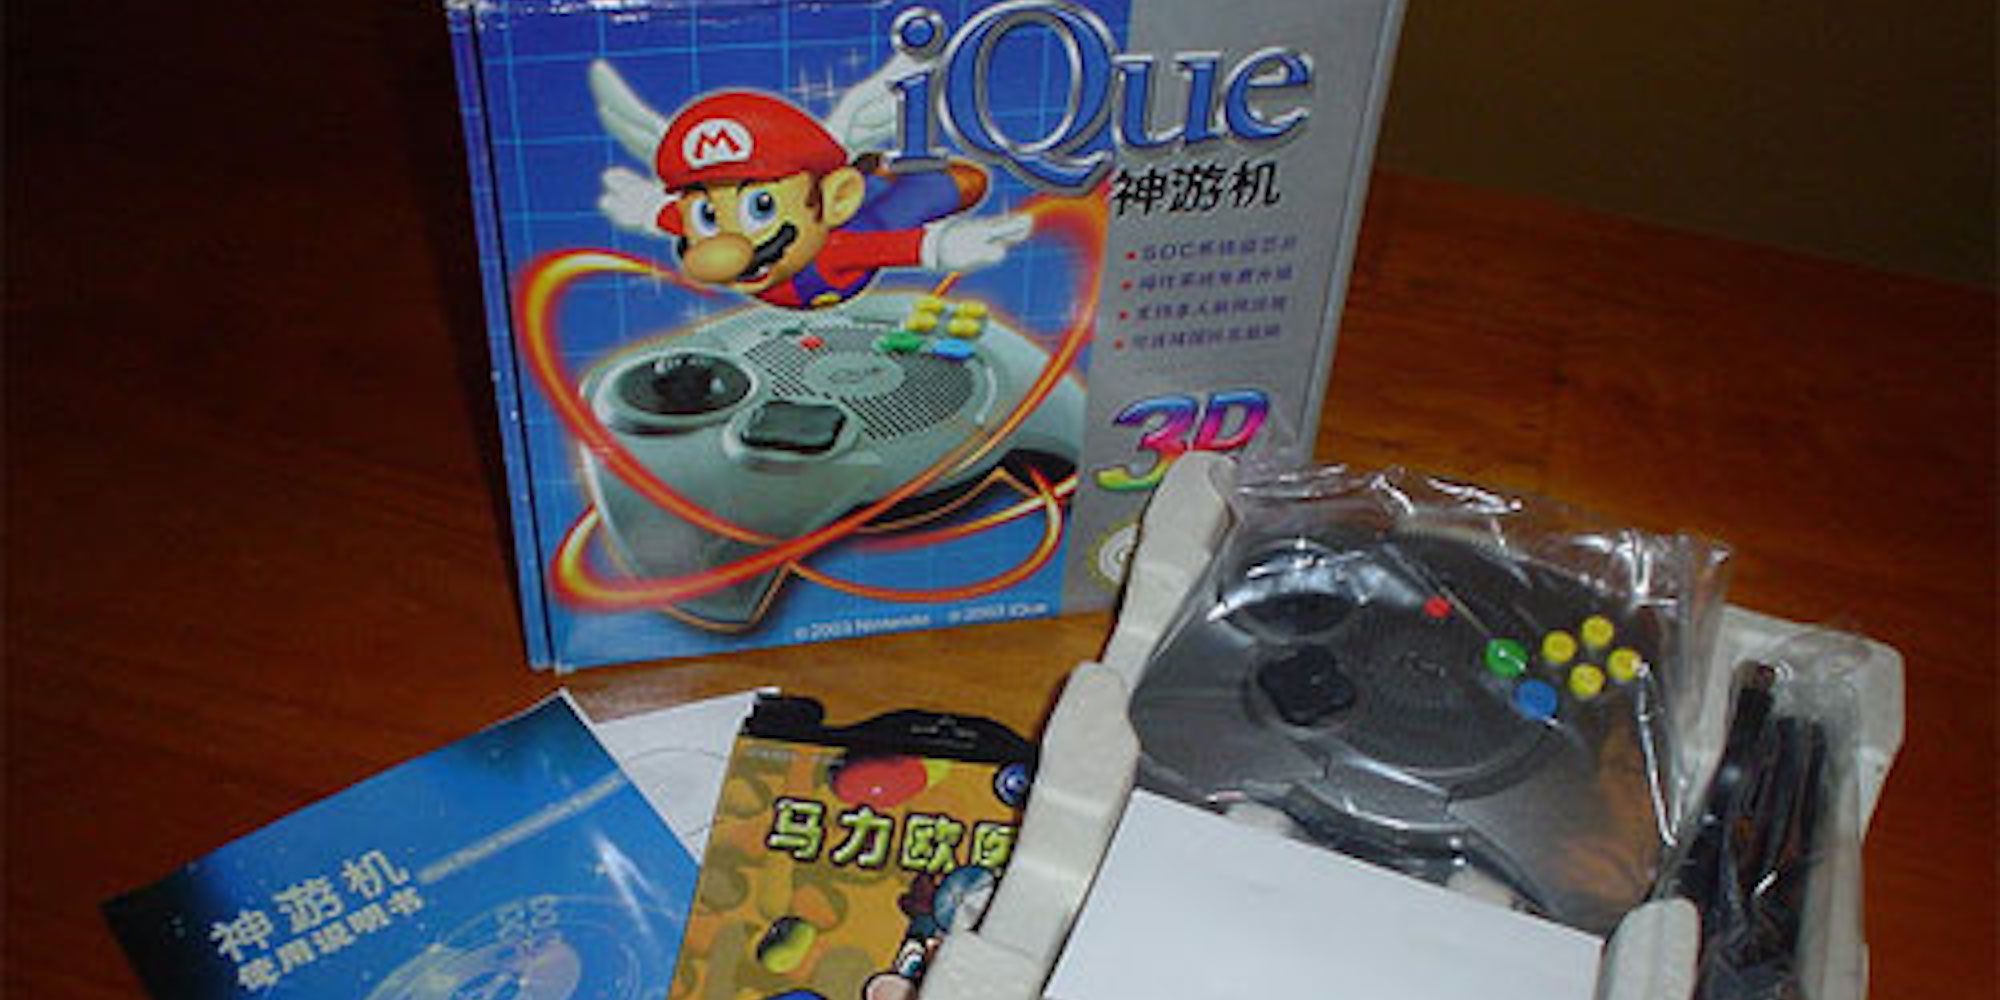 ique player out of the box